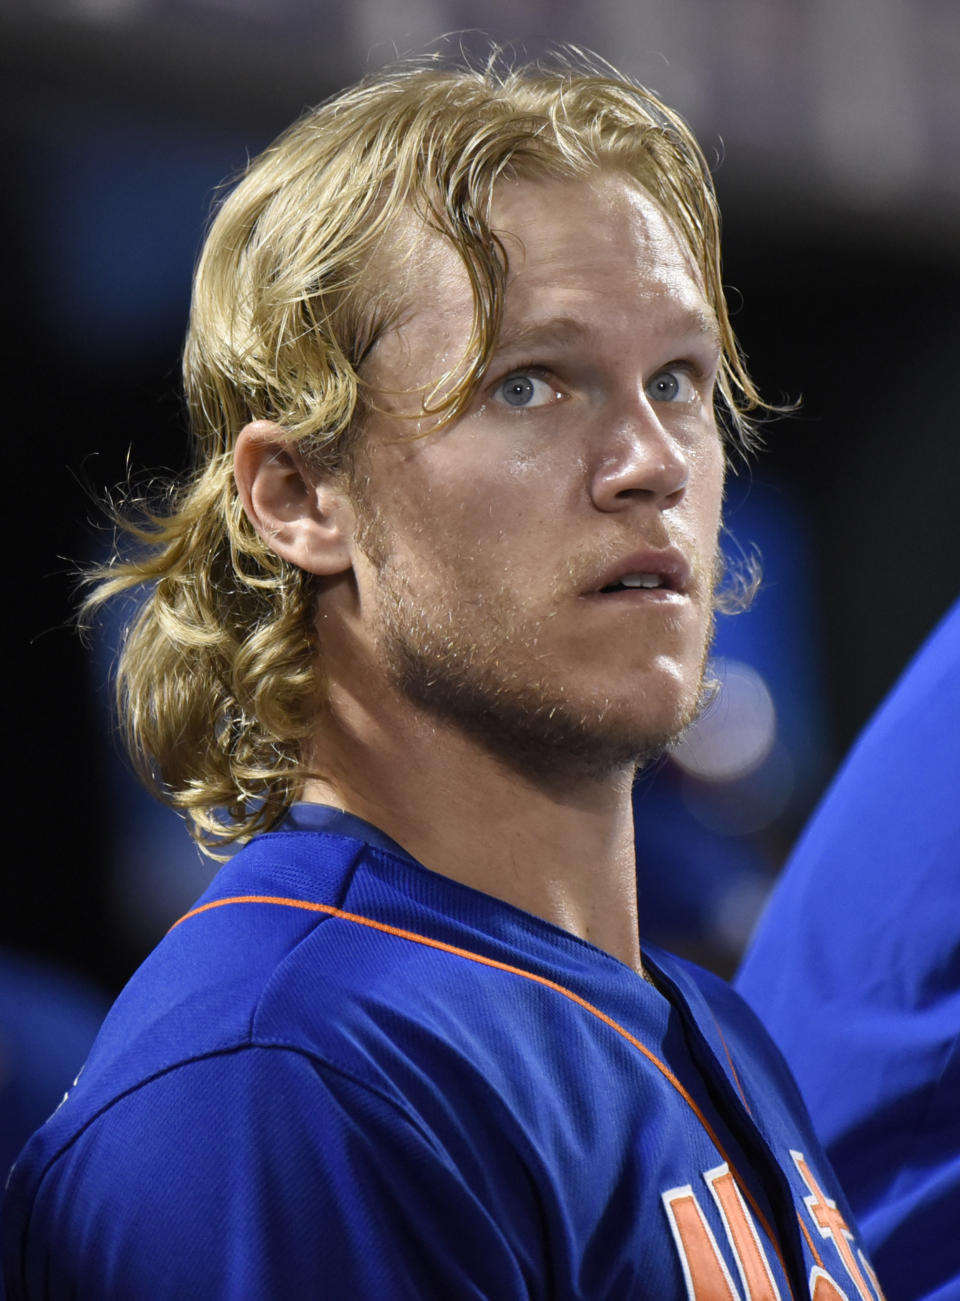 FILE - New York Mets pitcher Noah Syndergaard watches from the dugout after leaving the baseball game against the Arizona Diamondbacks on Friday, July 10, 2015, in New York. Syndergaard earned the moniker “Thor” for his flowing blonde locks. Astros starters Framber Valdez and Luis Garia look like naturals on the mound, but they've gotten an artificial boost from the barber shop. Both pitchers got hair extensions during this season. (AP Photo/Bill Kostroun, File)